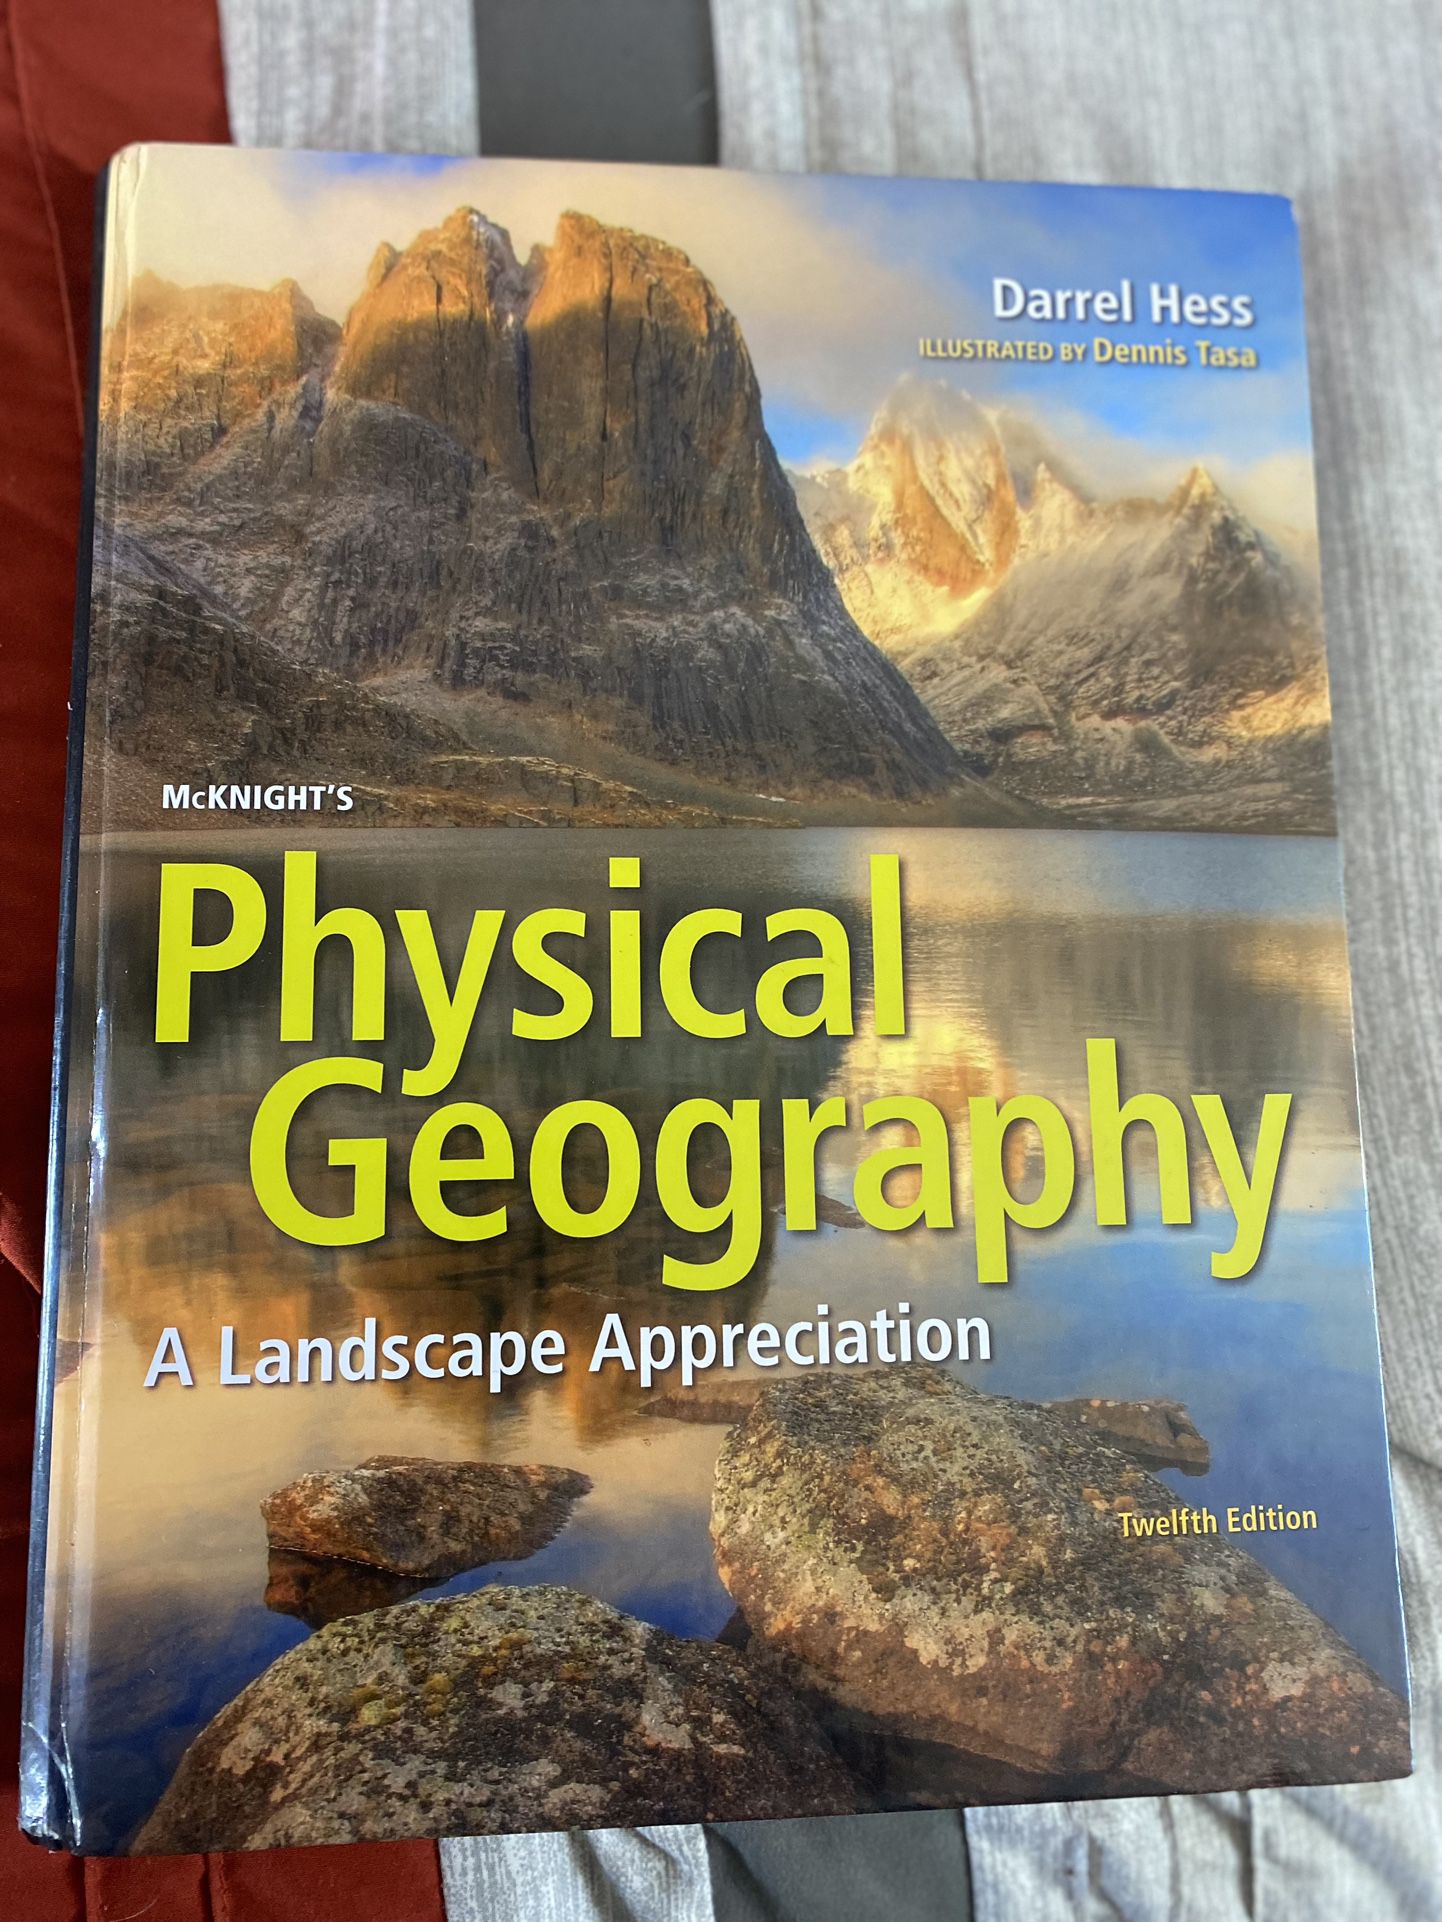 Physical Geography ‘A Landscape Appreciation’ By Darrel Hess